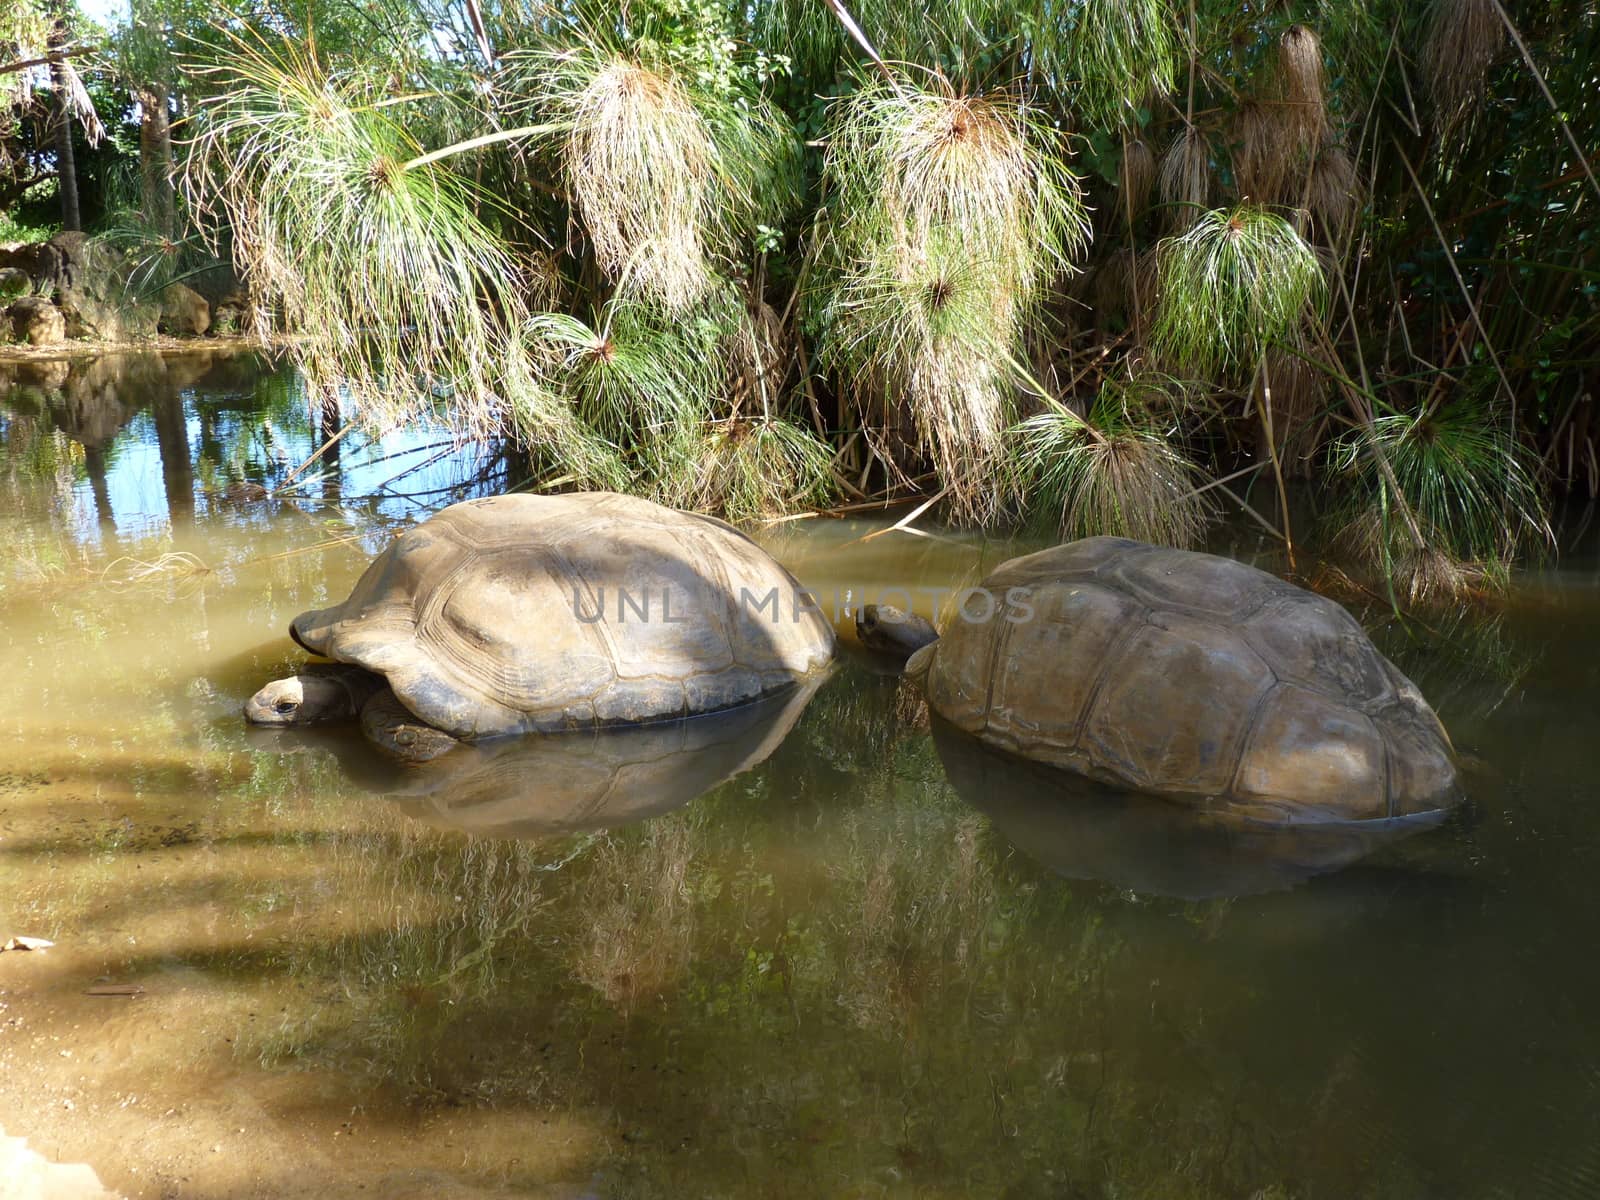 Giant Turtles In Vanille Des Mascareignes Park, South Of Mauritius Island